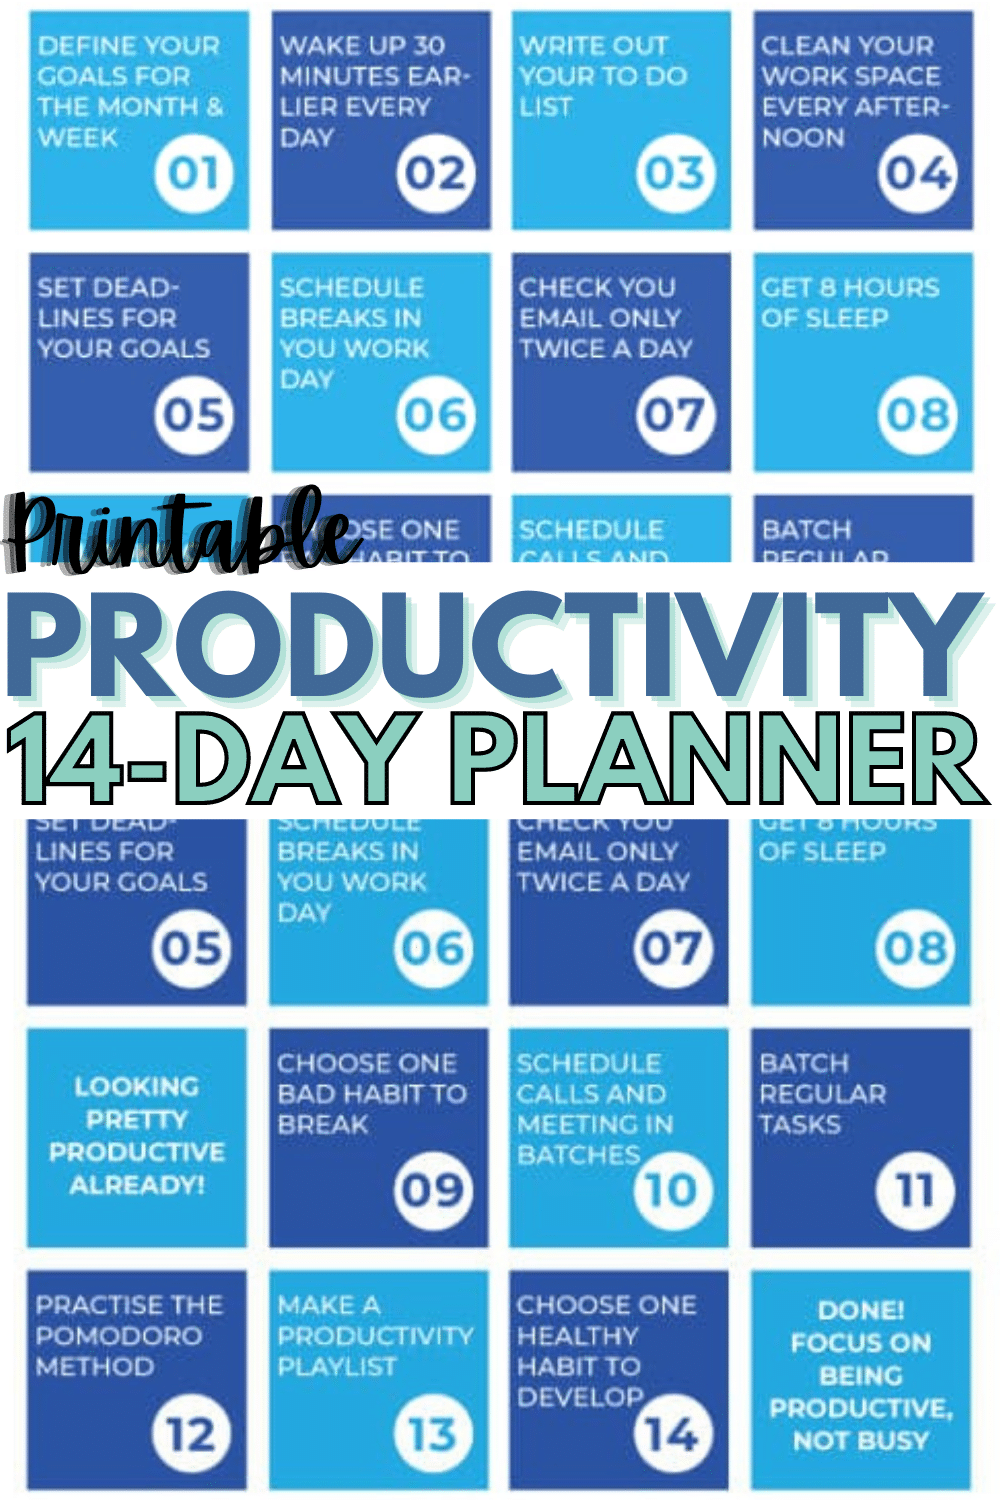 This printable productivity planner comes with a 14-day productivity challenge and a daily planner to help you accomplish more. #planner #printables #productivity via @wondermomwannab